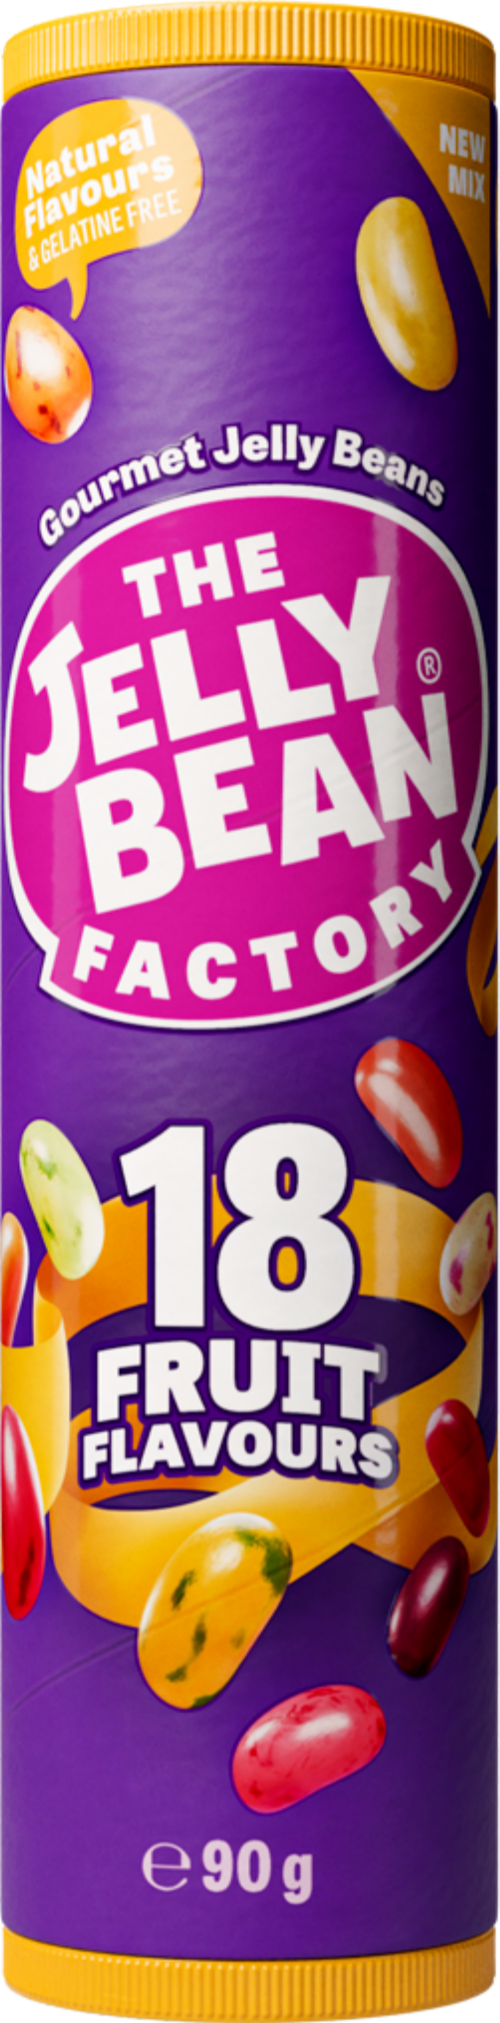 JELLY BEAN FACTORY 18 Fruit Flavours Mix - Tube 90g